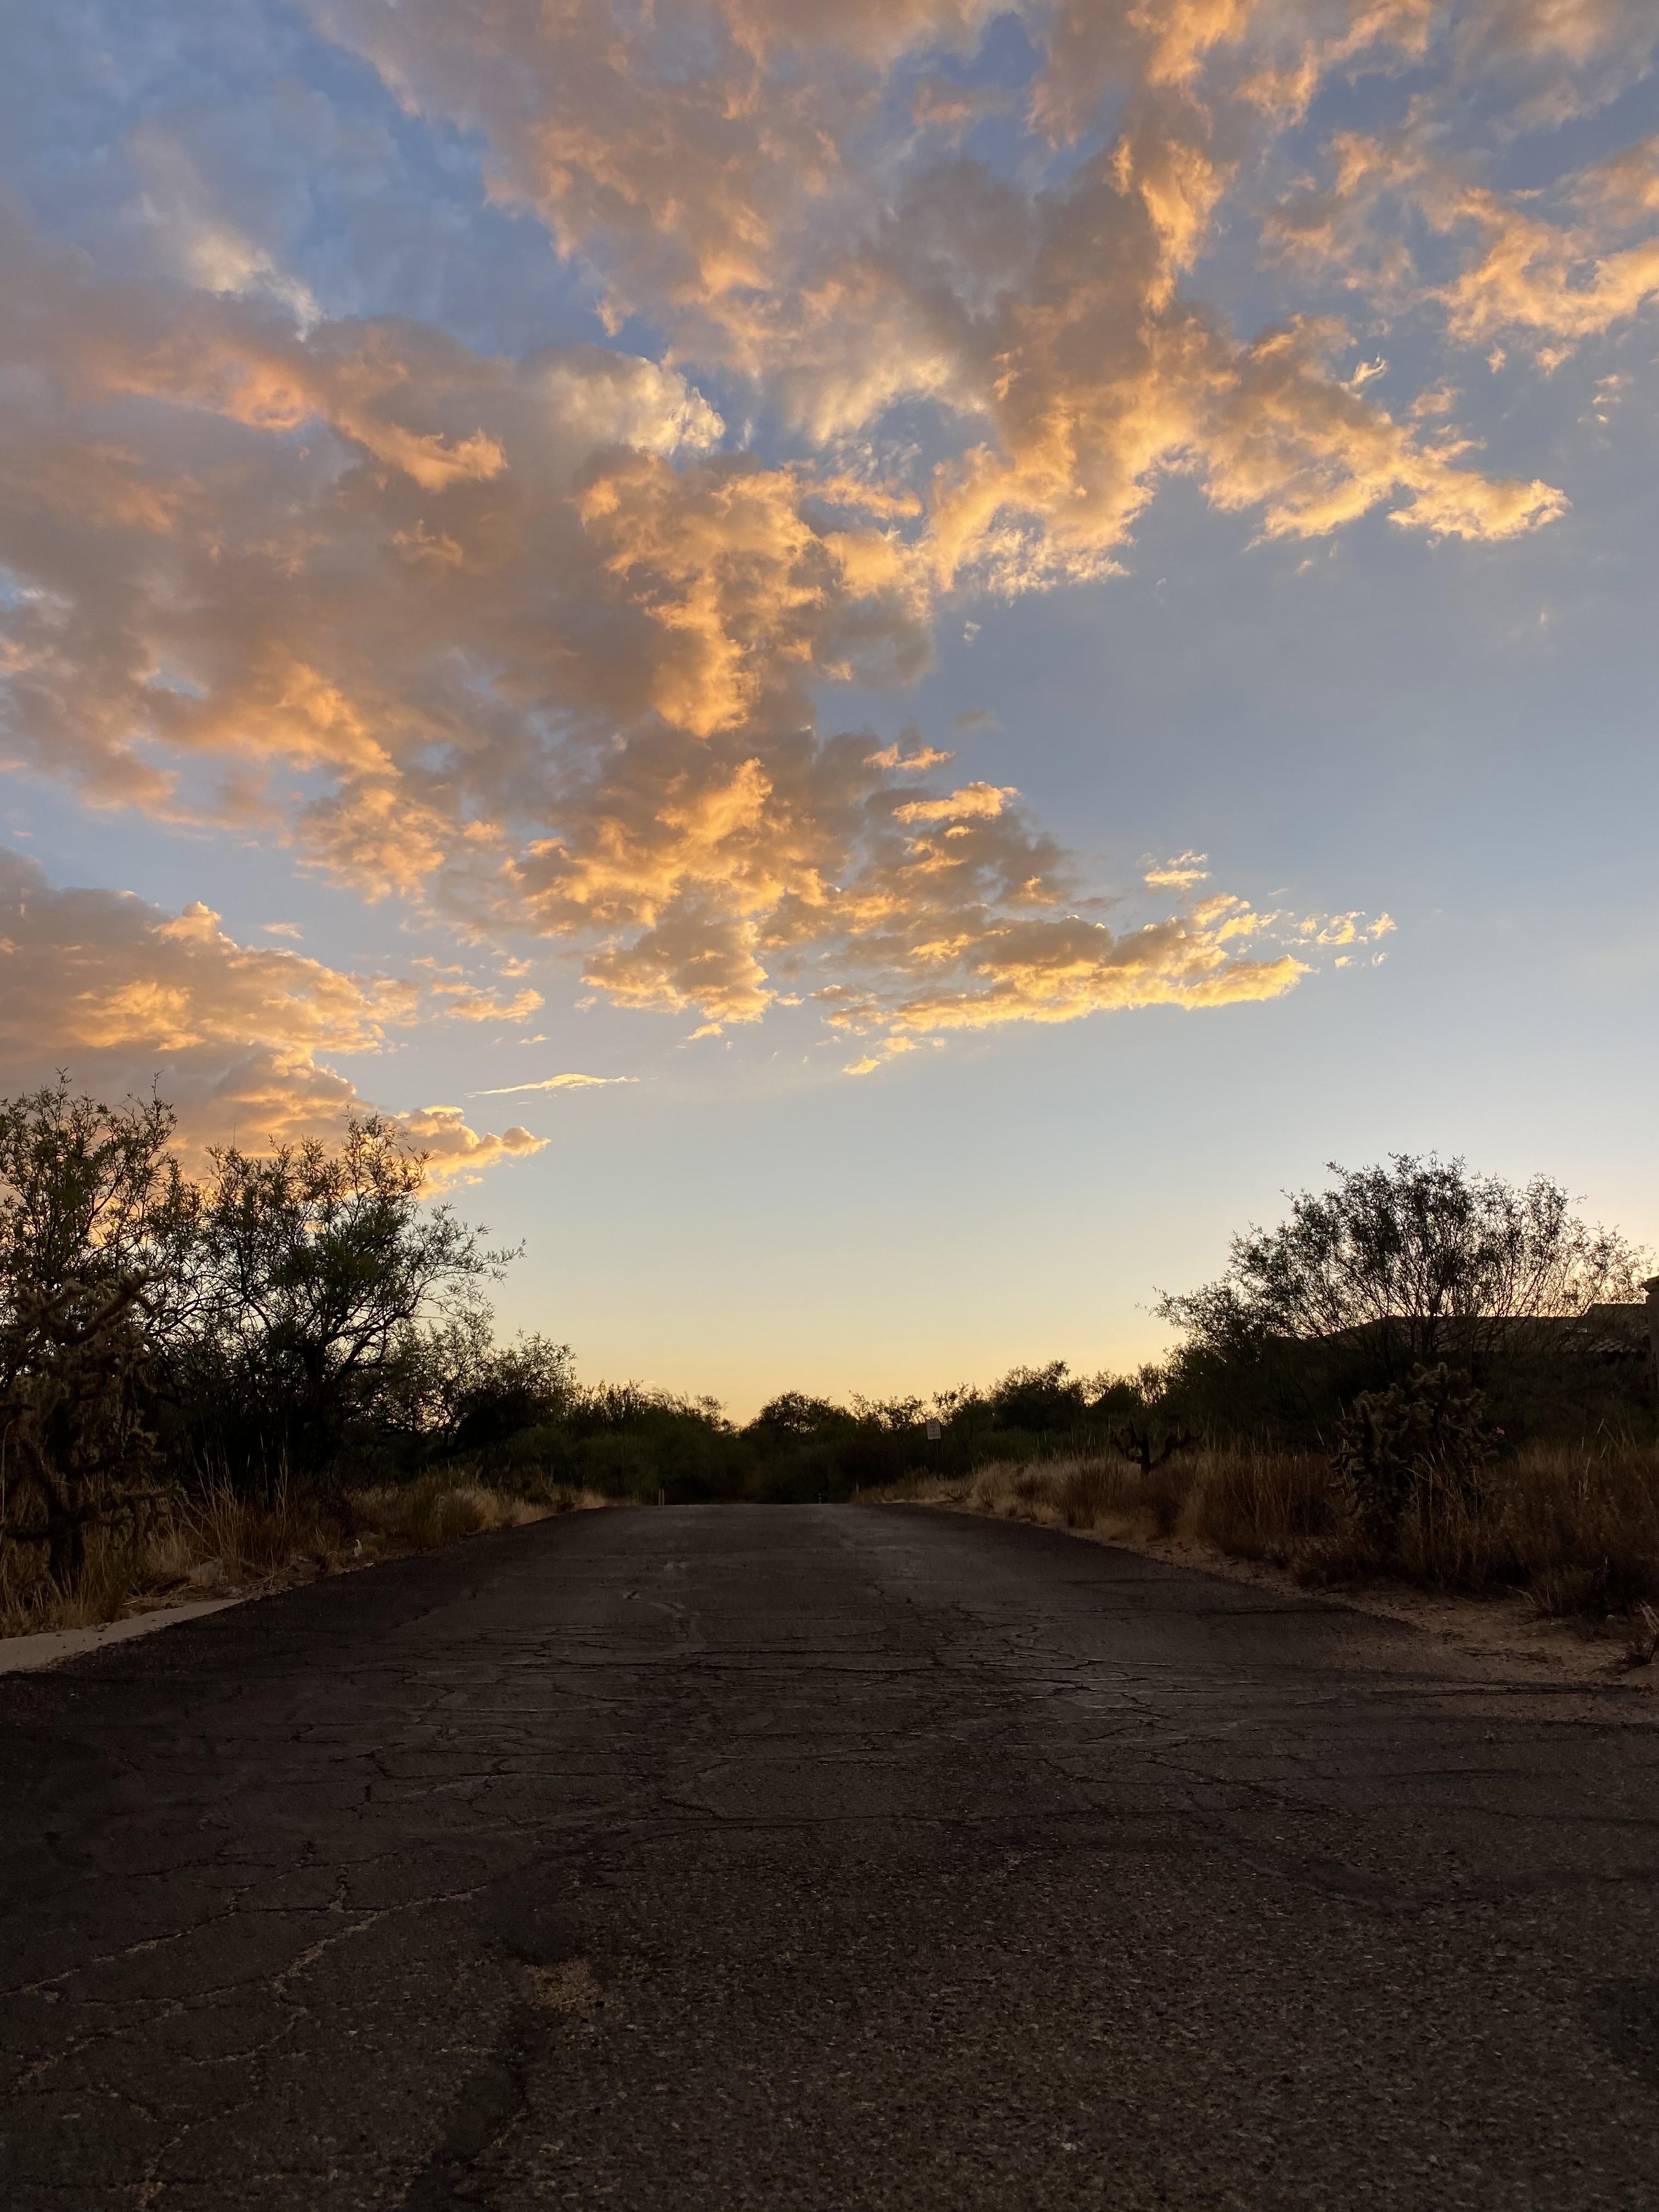 Photo by Katherine Standridge   |  I took this image because I have always loved sunsets, this is one of my favorite sunsets that I have captured. In this image I used the road as an eye guide to lead ones eyes up to the sky. 